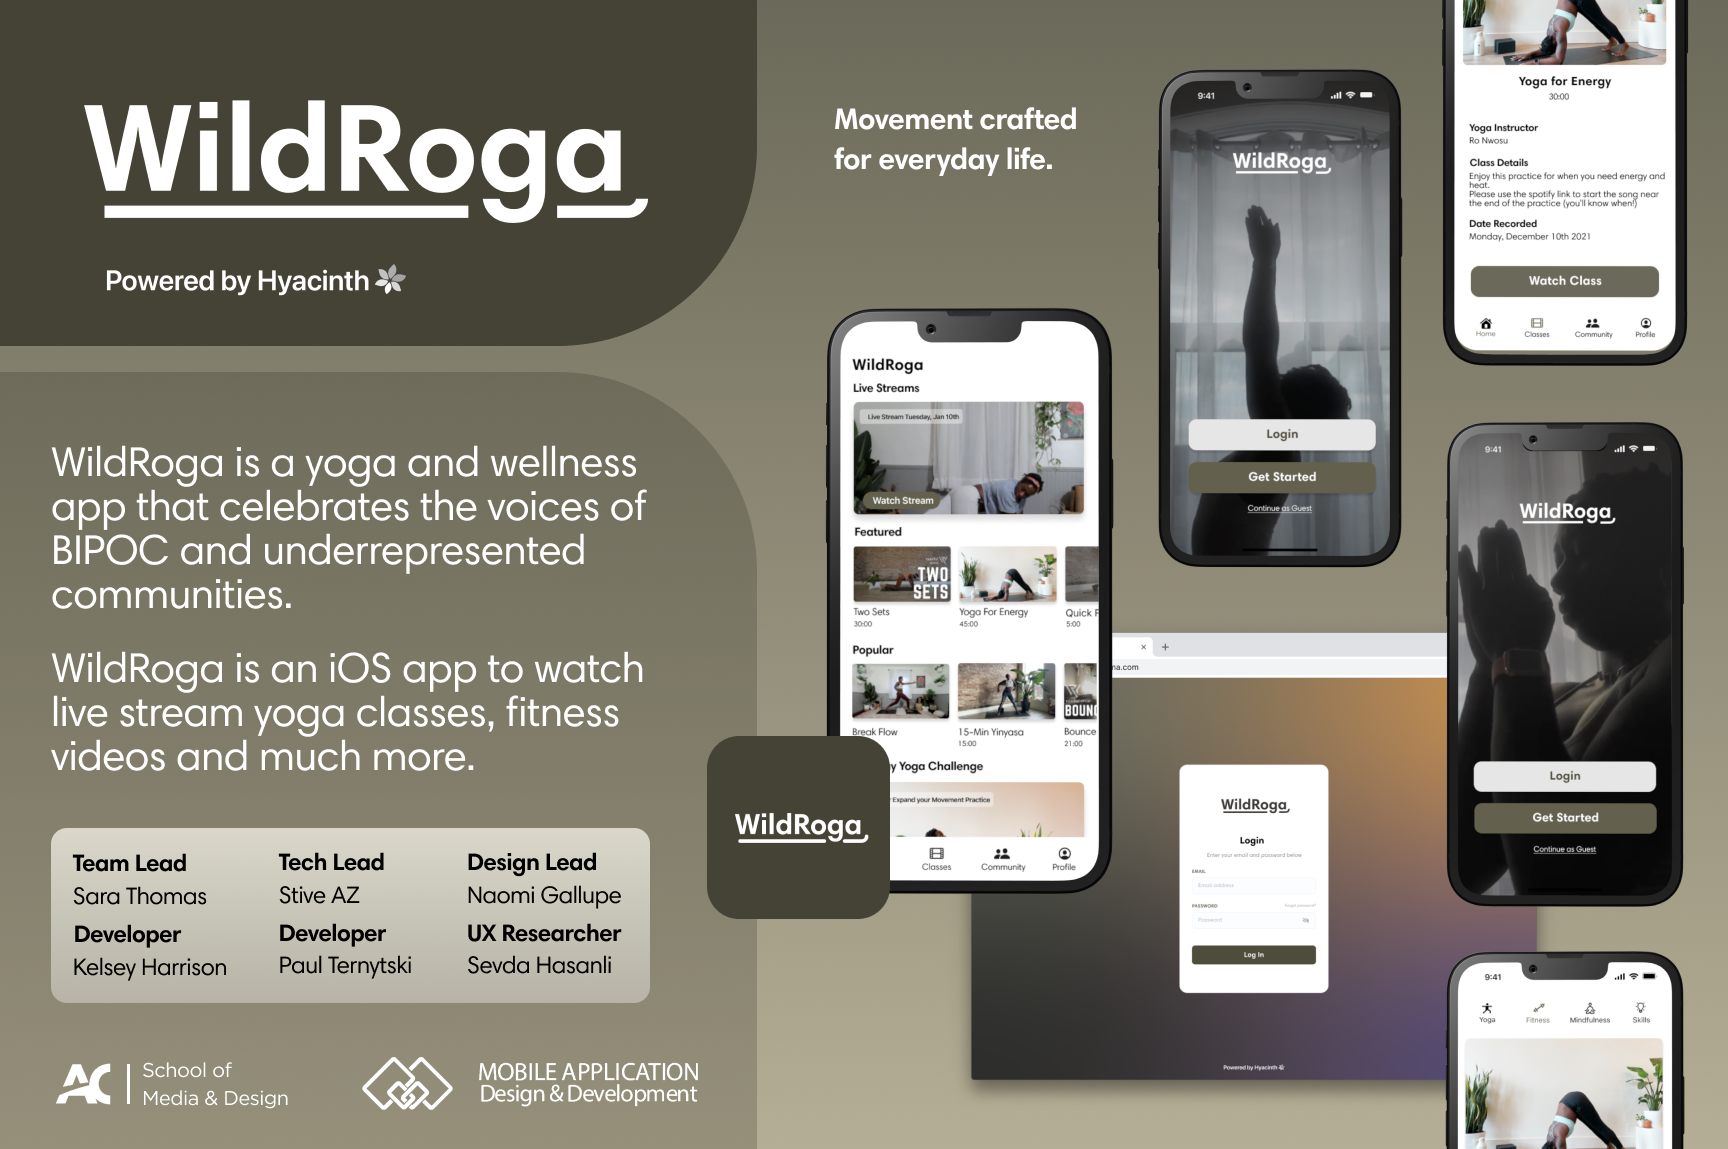 WildRoga Showcase poster. WildRoga is a yoga and wellness app that celebrates the voices of BIPOC and underrepresented communities. The app offers live streams, fitness videos, wellness talks, and so much more. Join and create an experience that best suits your needs.